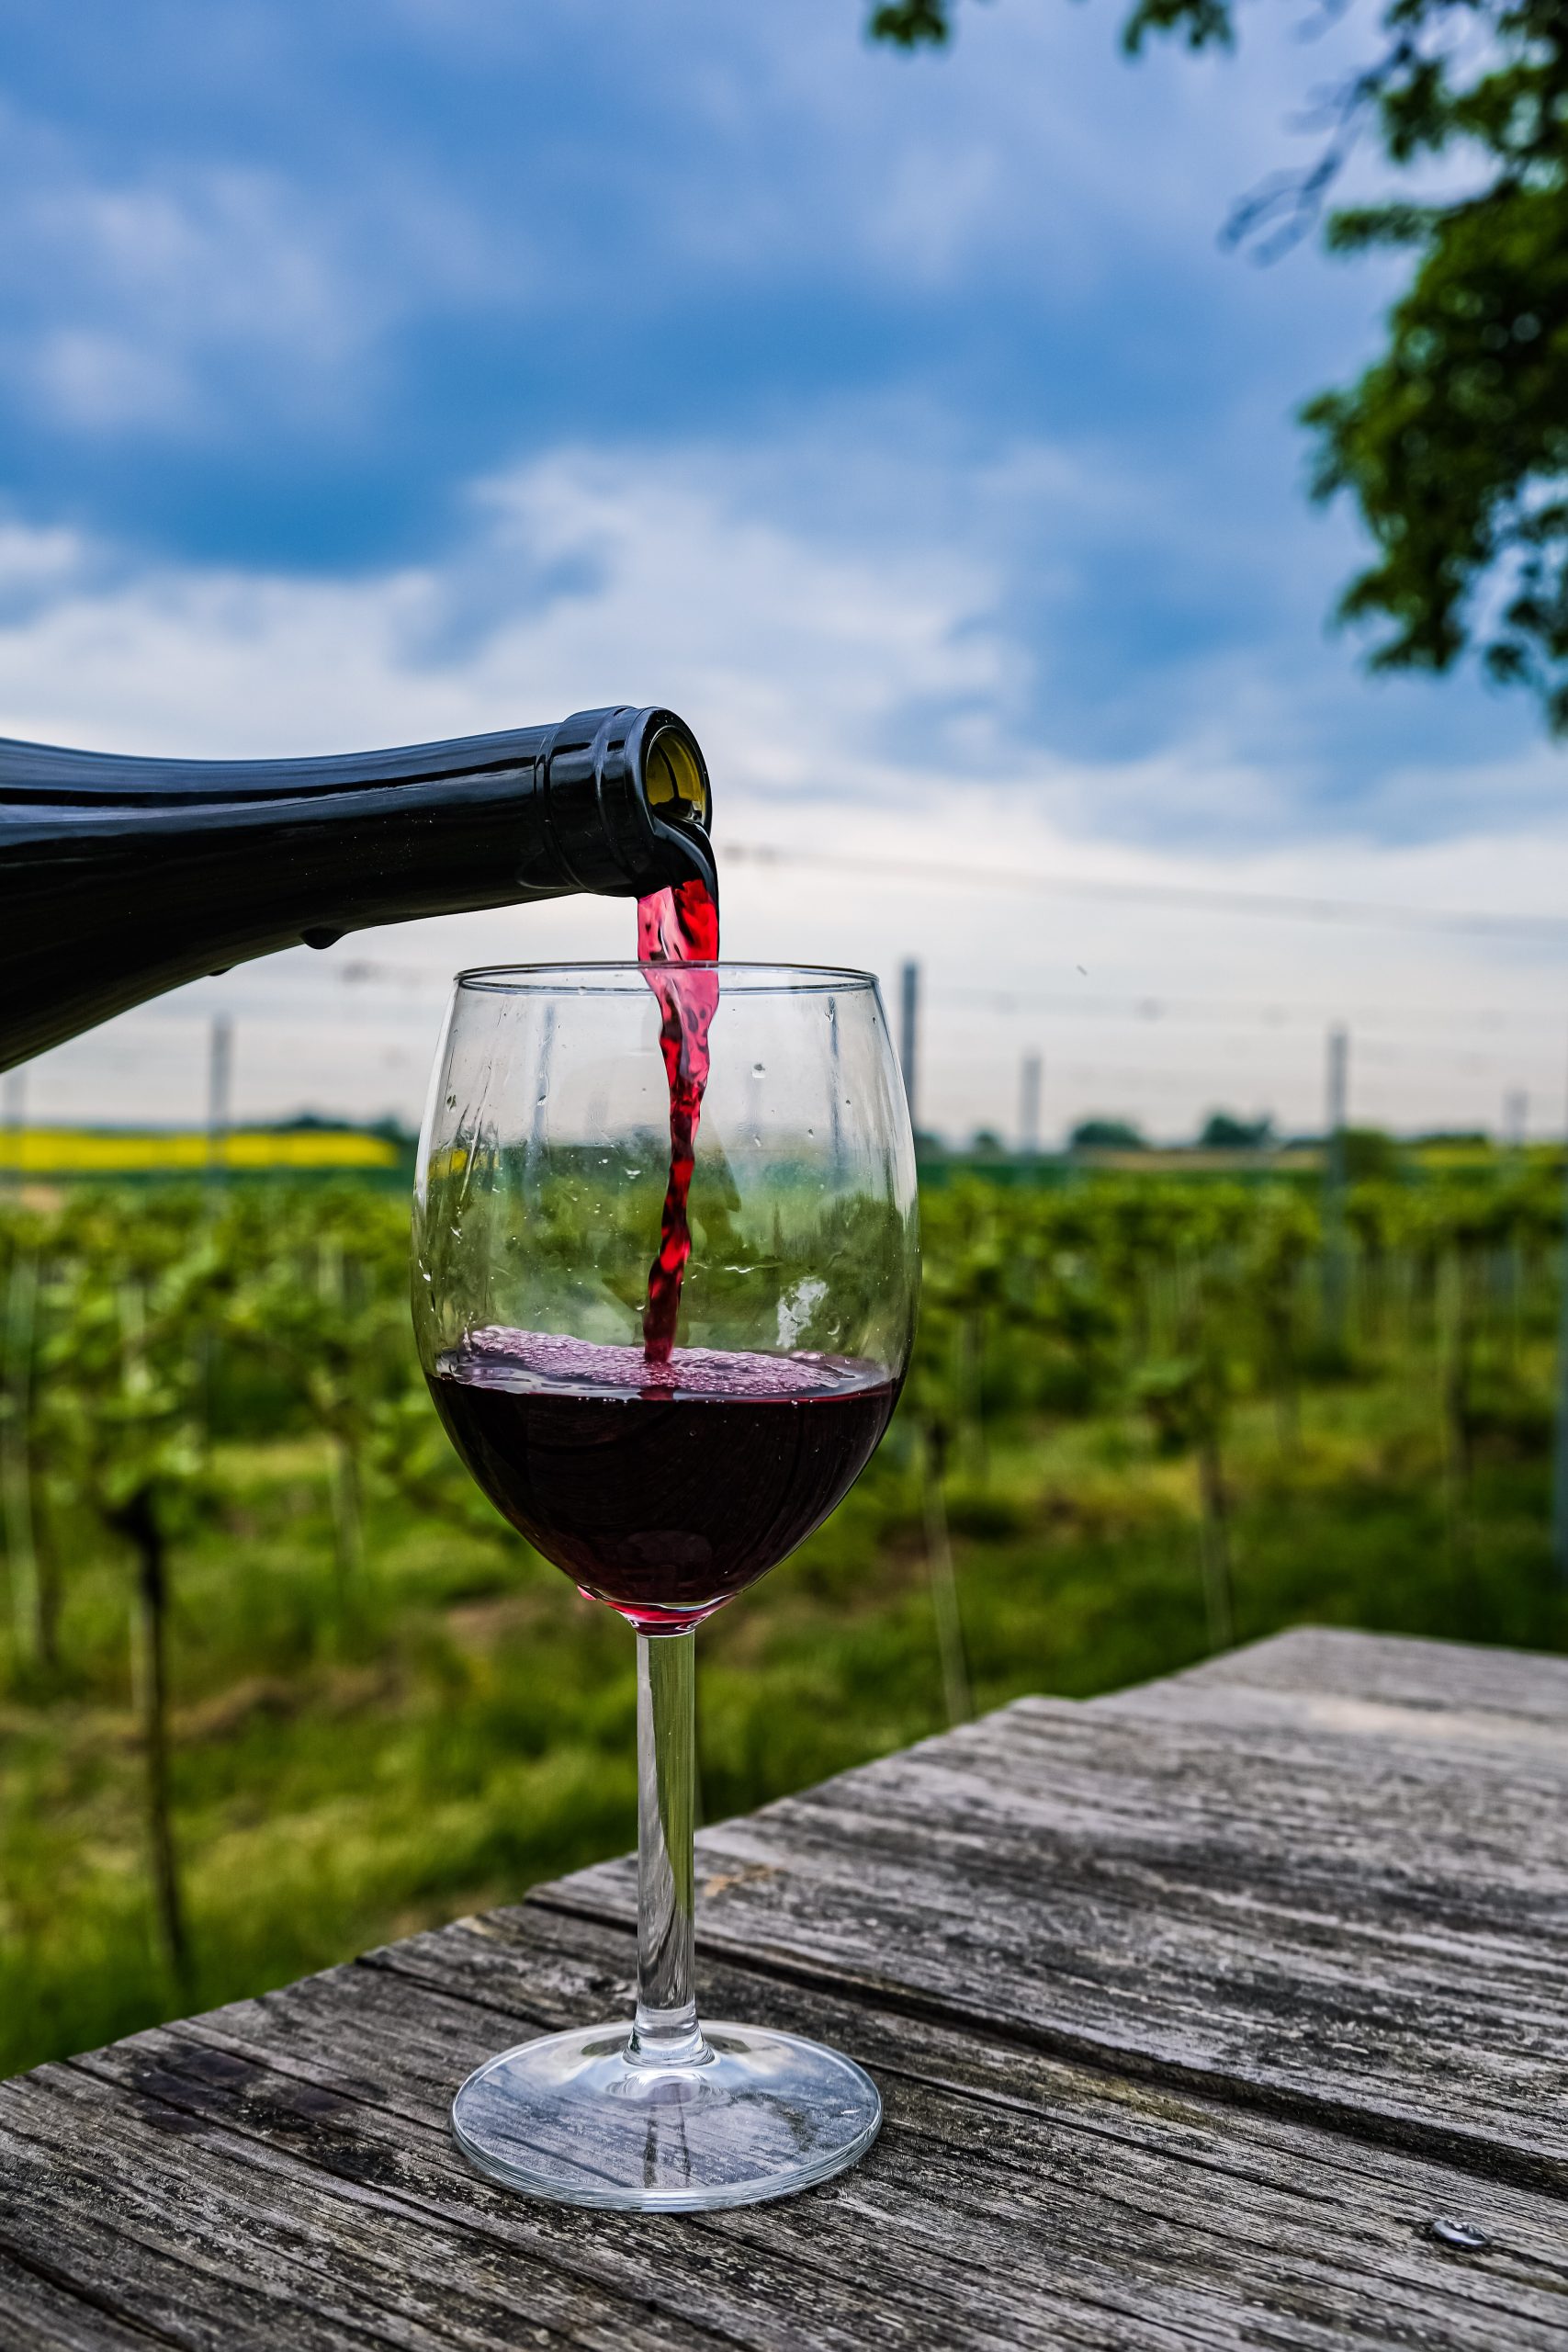 Learn about wine making in Wroclaw